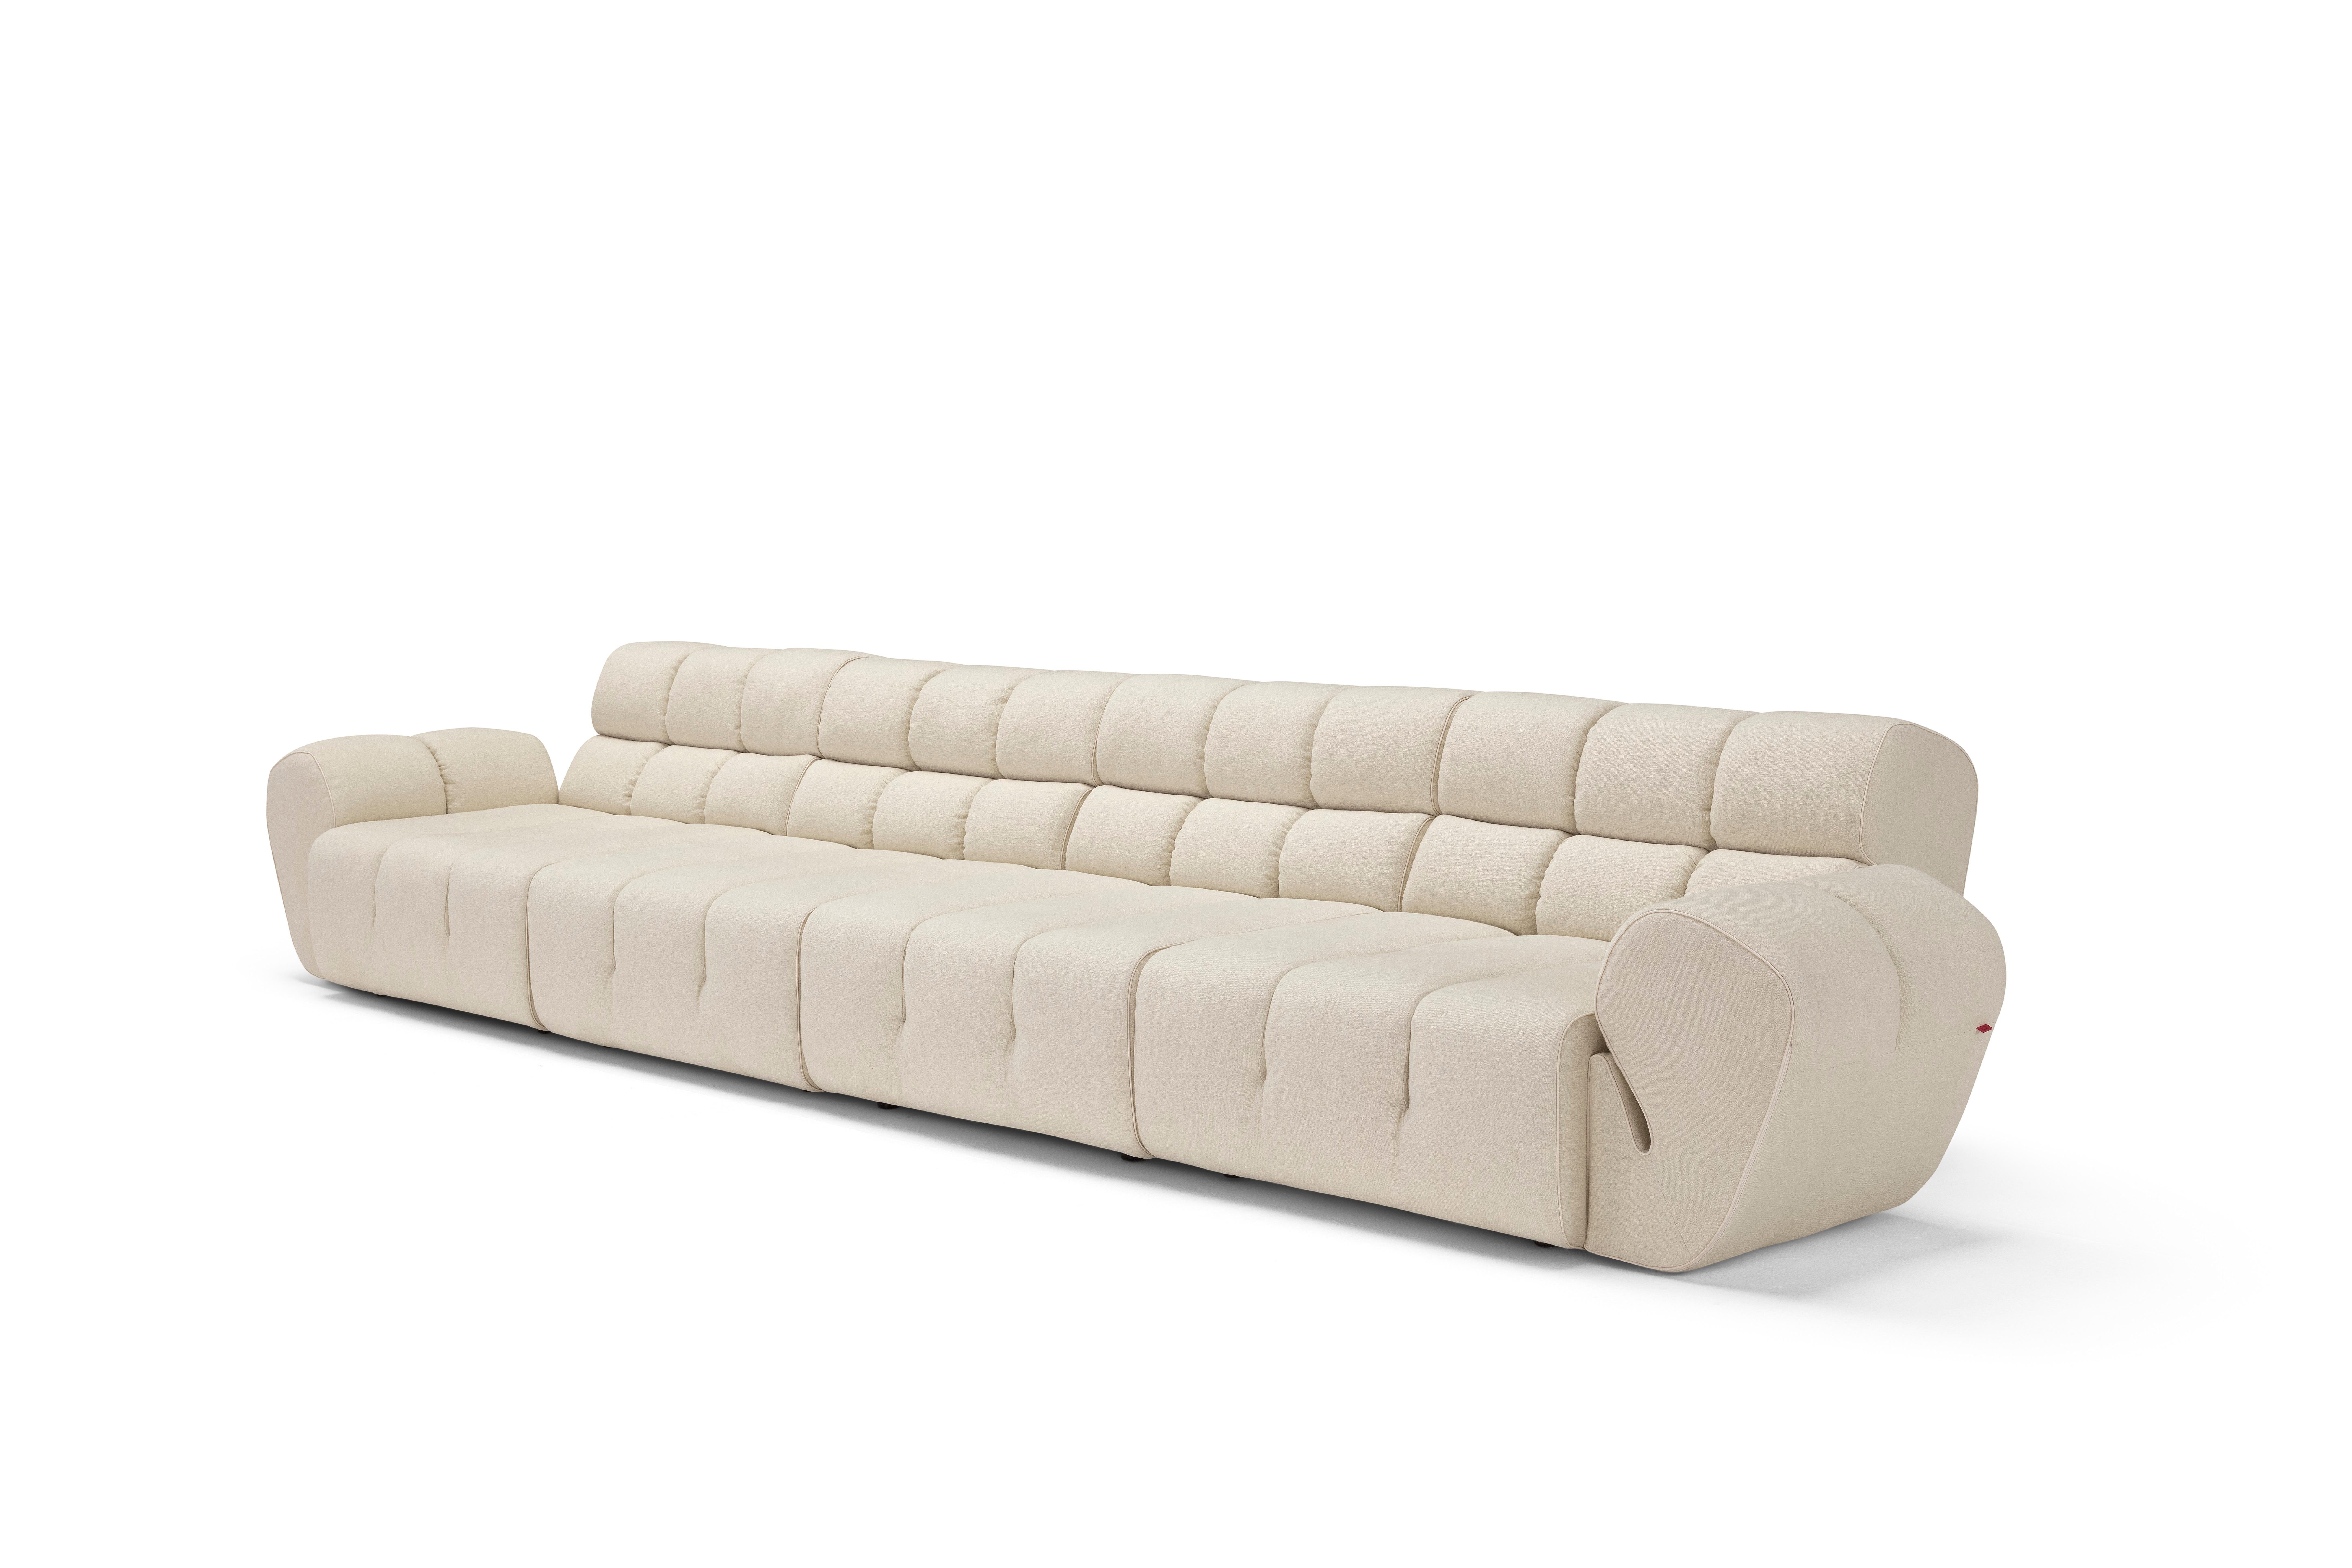 Wool Contemporary Sectional Sofa 'Palmo' by Amura Lab, Brera 850, Ref. 13 For Sale